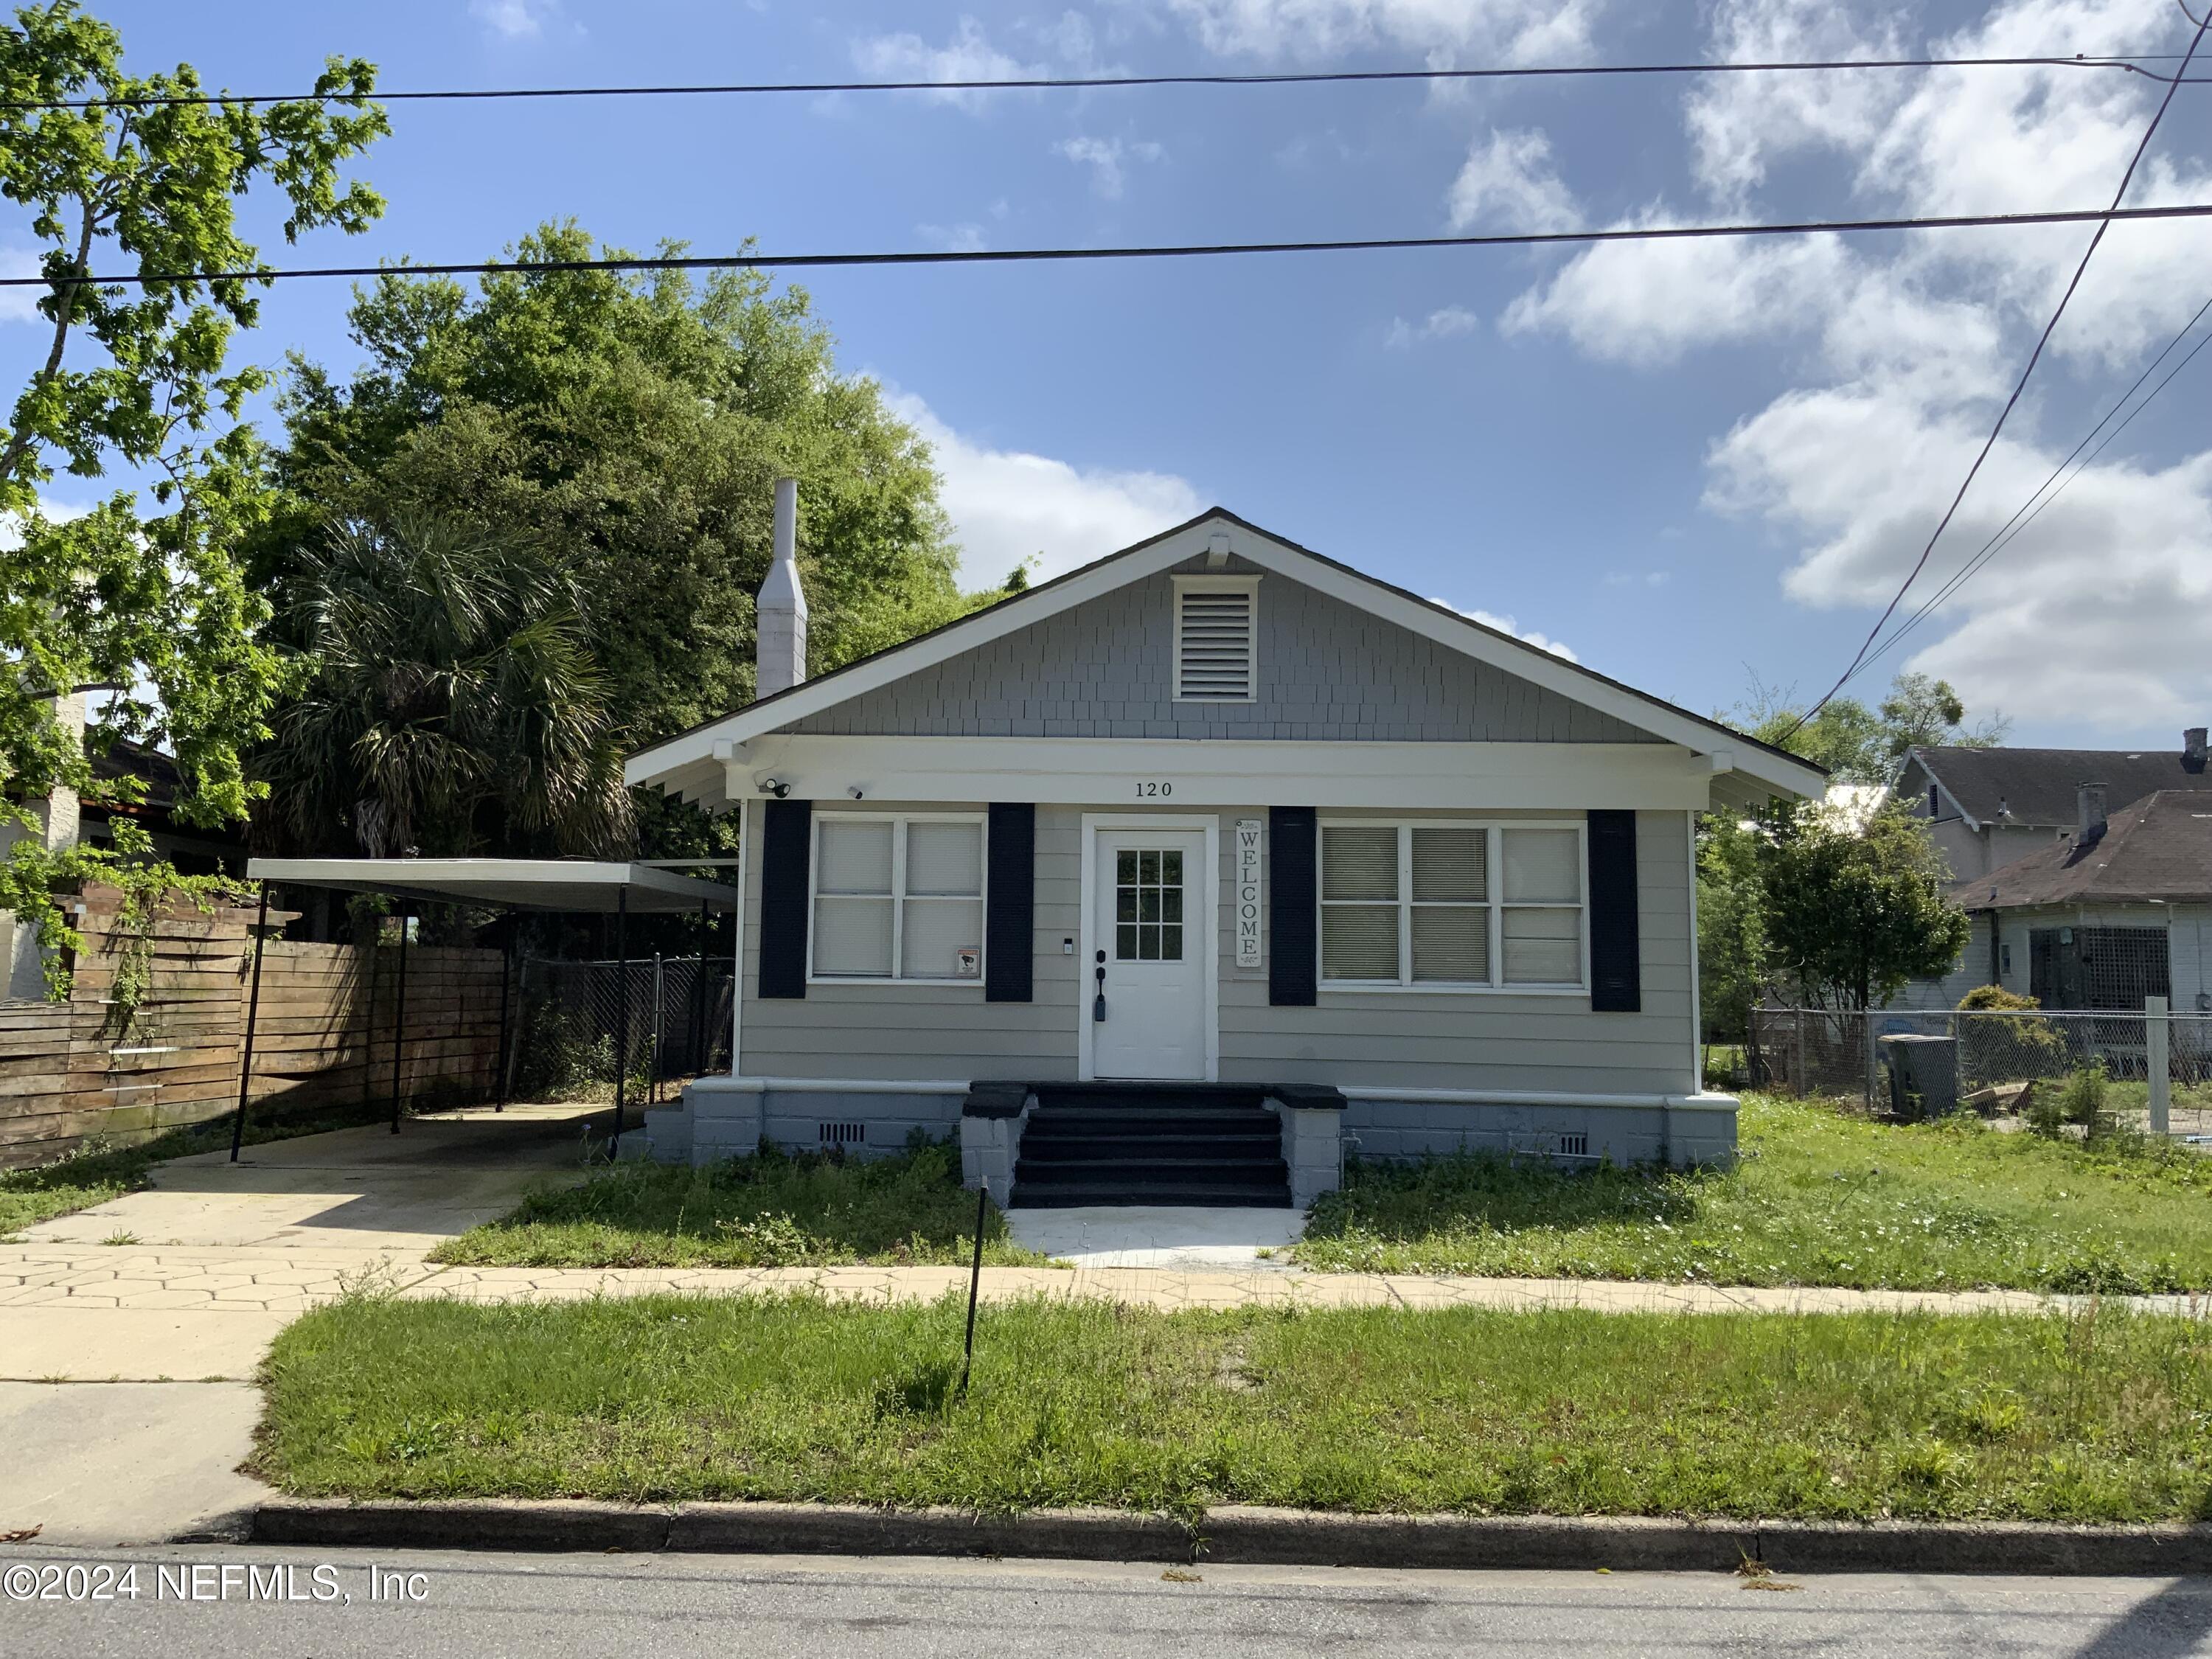 Jacksonville, FL home for sale located at 120 E 19TH Street, Jacksonville, FL 32206